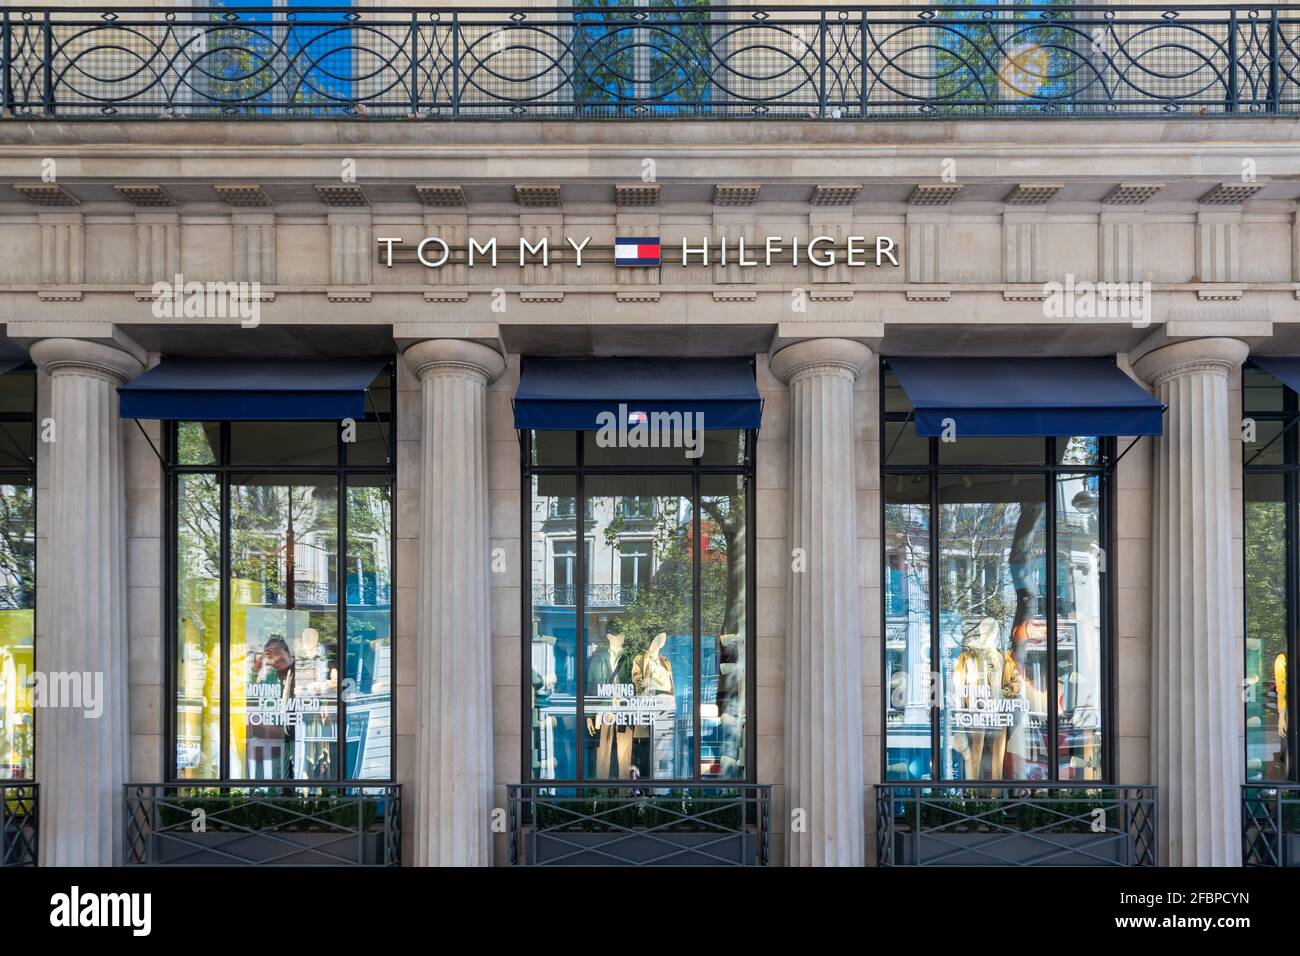 Tommy hilfiger shop sign hi-res stock photography and images - Alamy